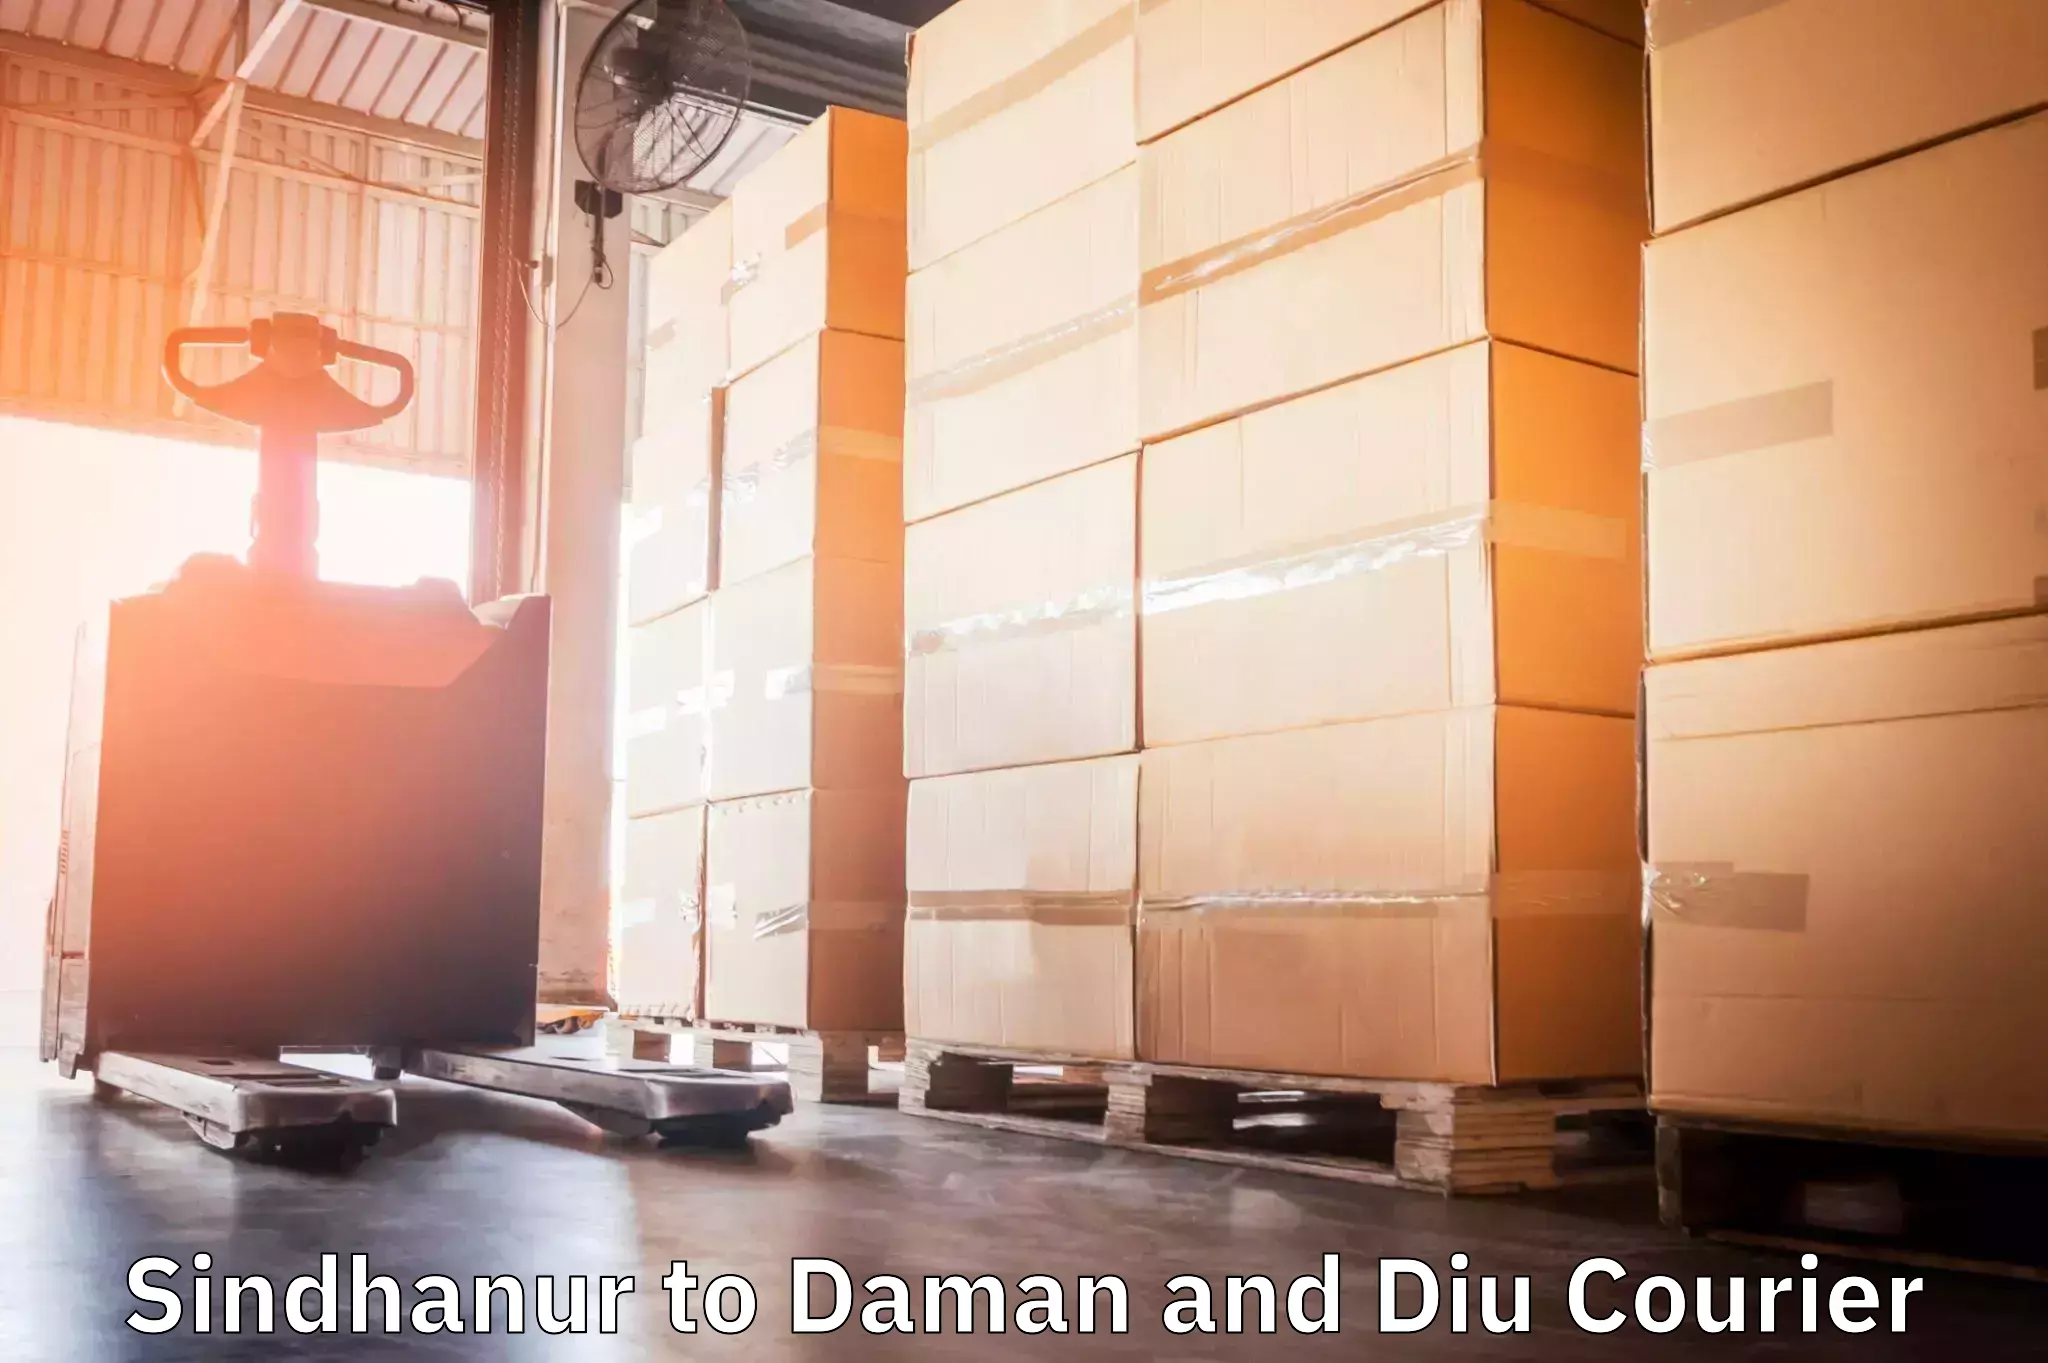 Global courier networks Sindhanur to Daman and Diu